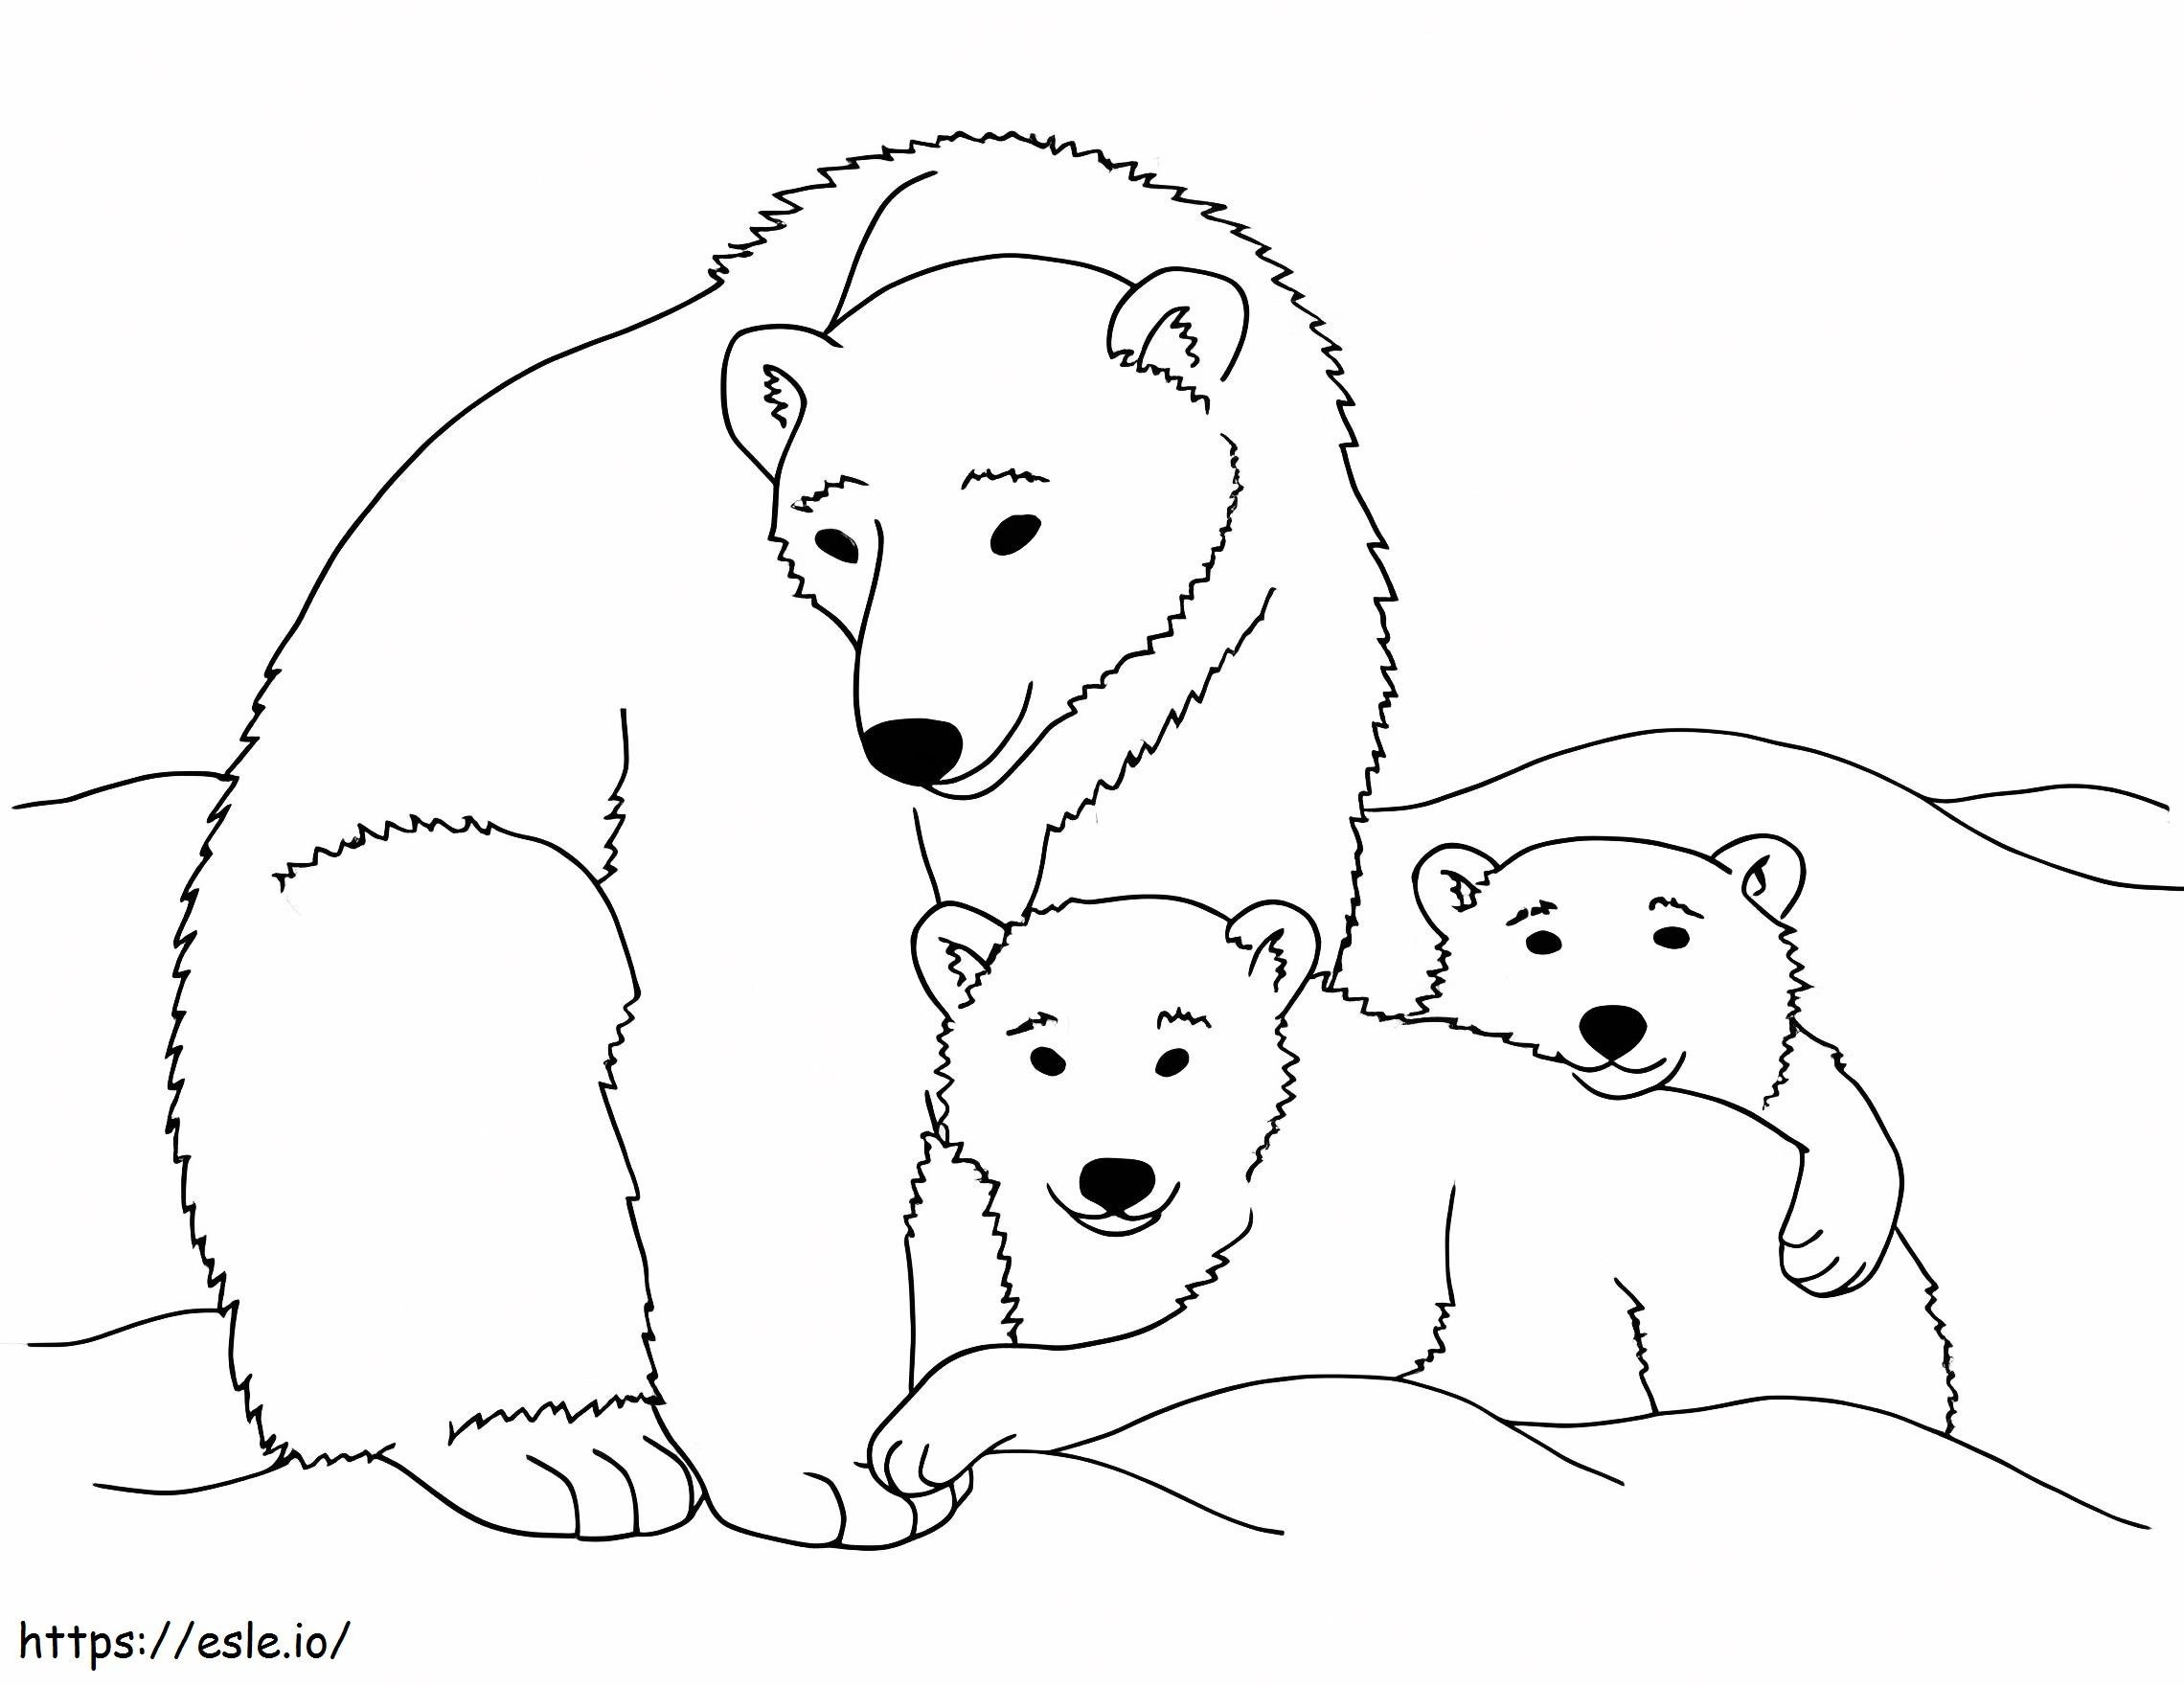 Smiling Ice Bear Family coloring page